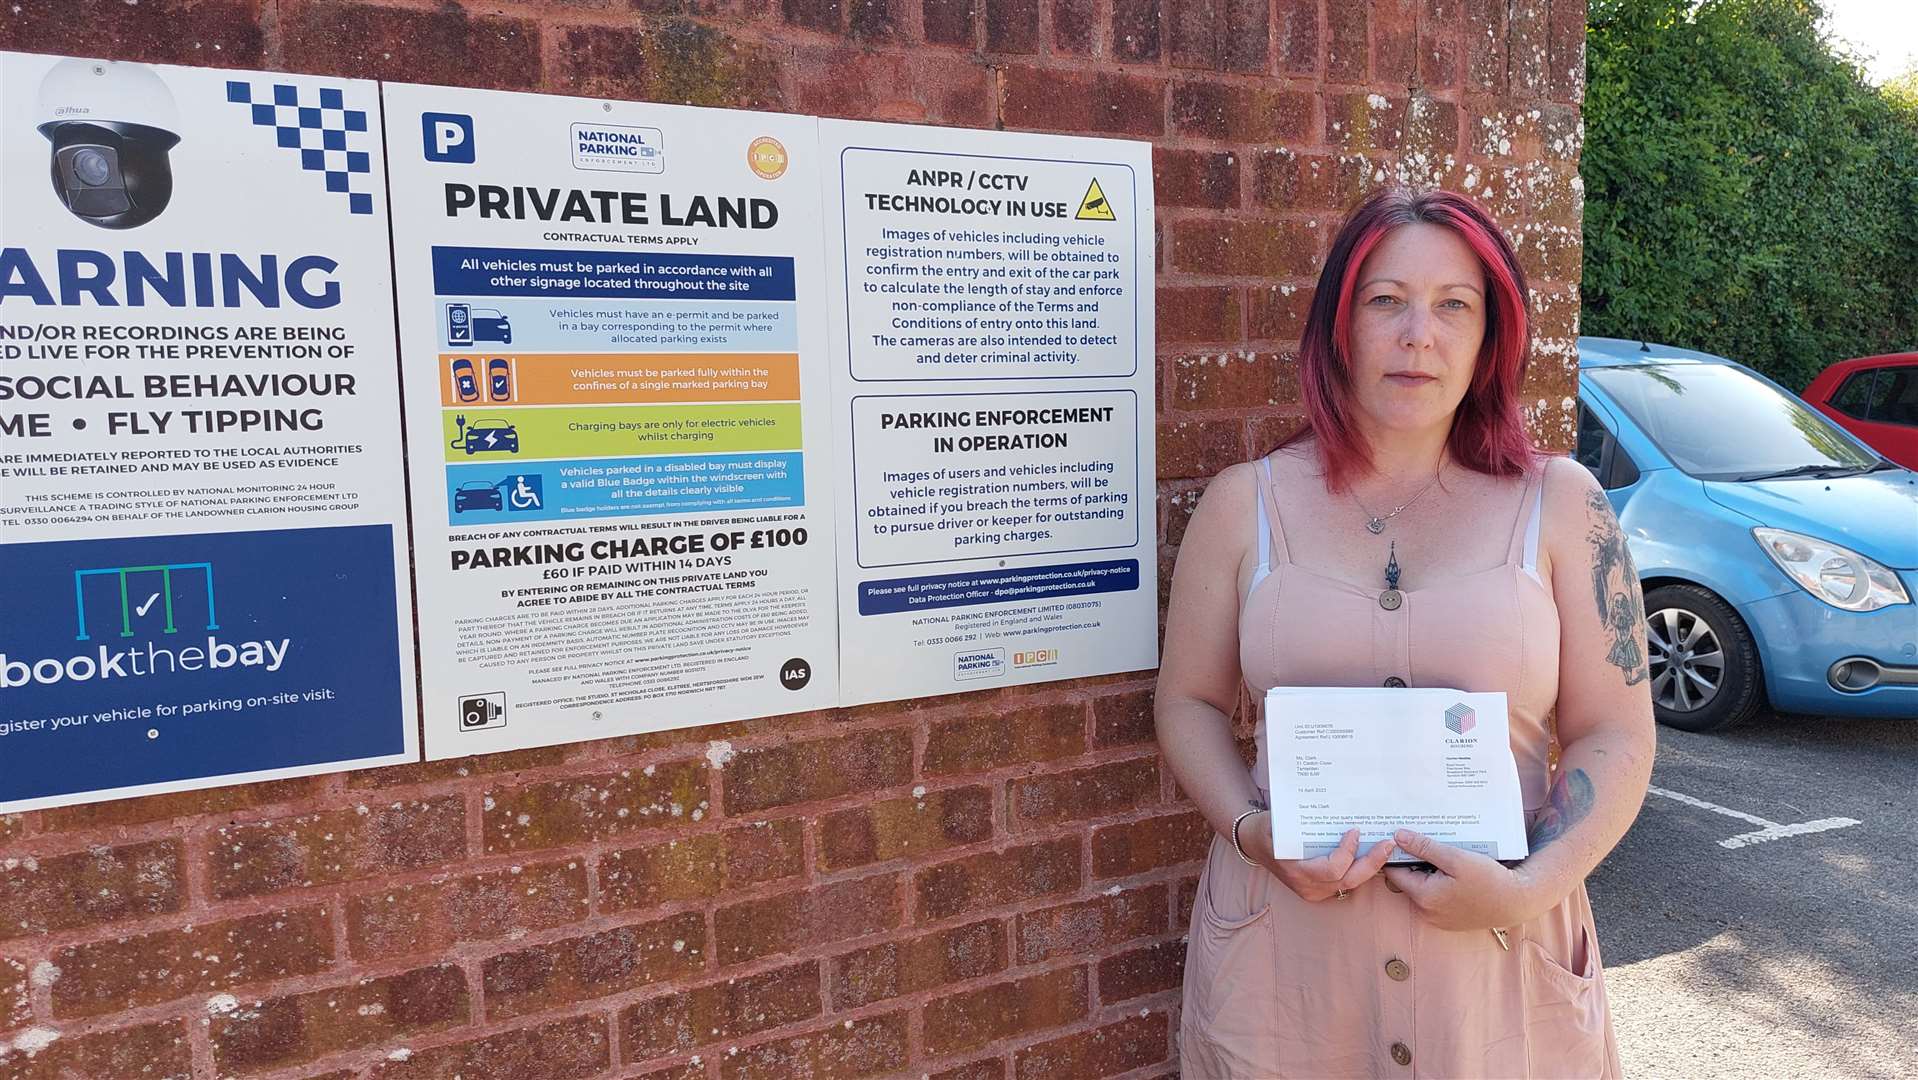 Caxton Close resident Angela Clark has been fined twice, despite having a permit